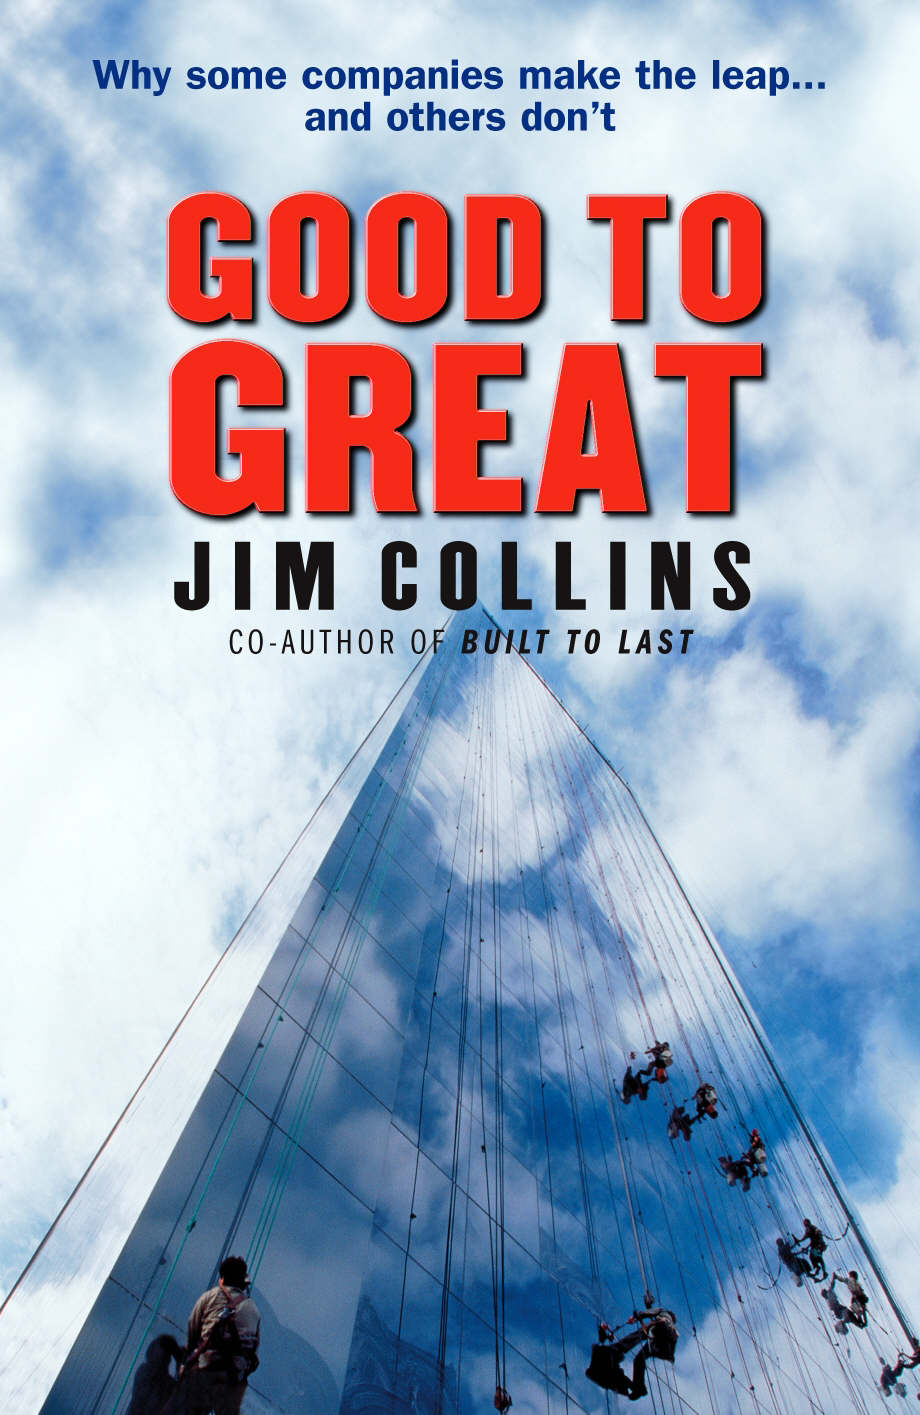 Book report on good to great by jim collins